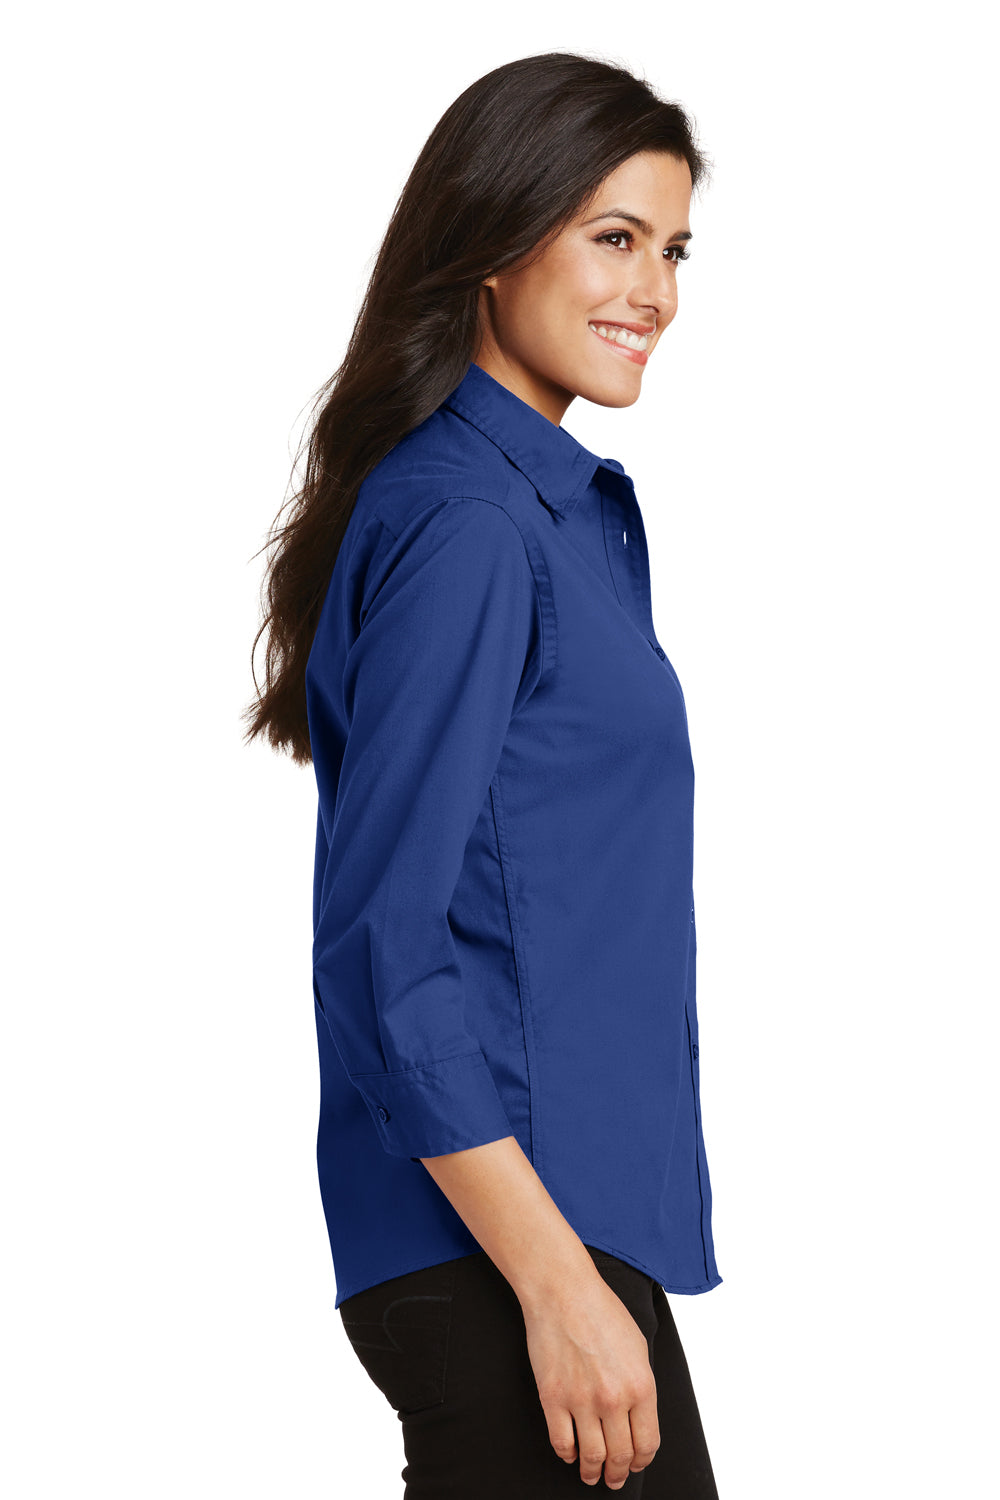 Port Authority L612 Womens Easy Care Wrinkle Resistant 3/4 Sleeve Button Down Shirt Royal Blue Side